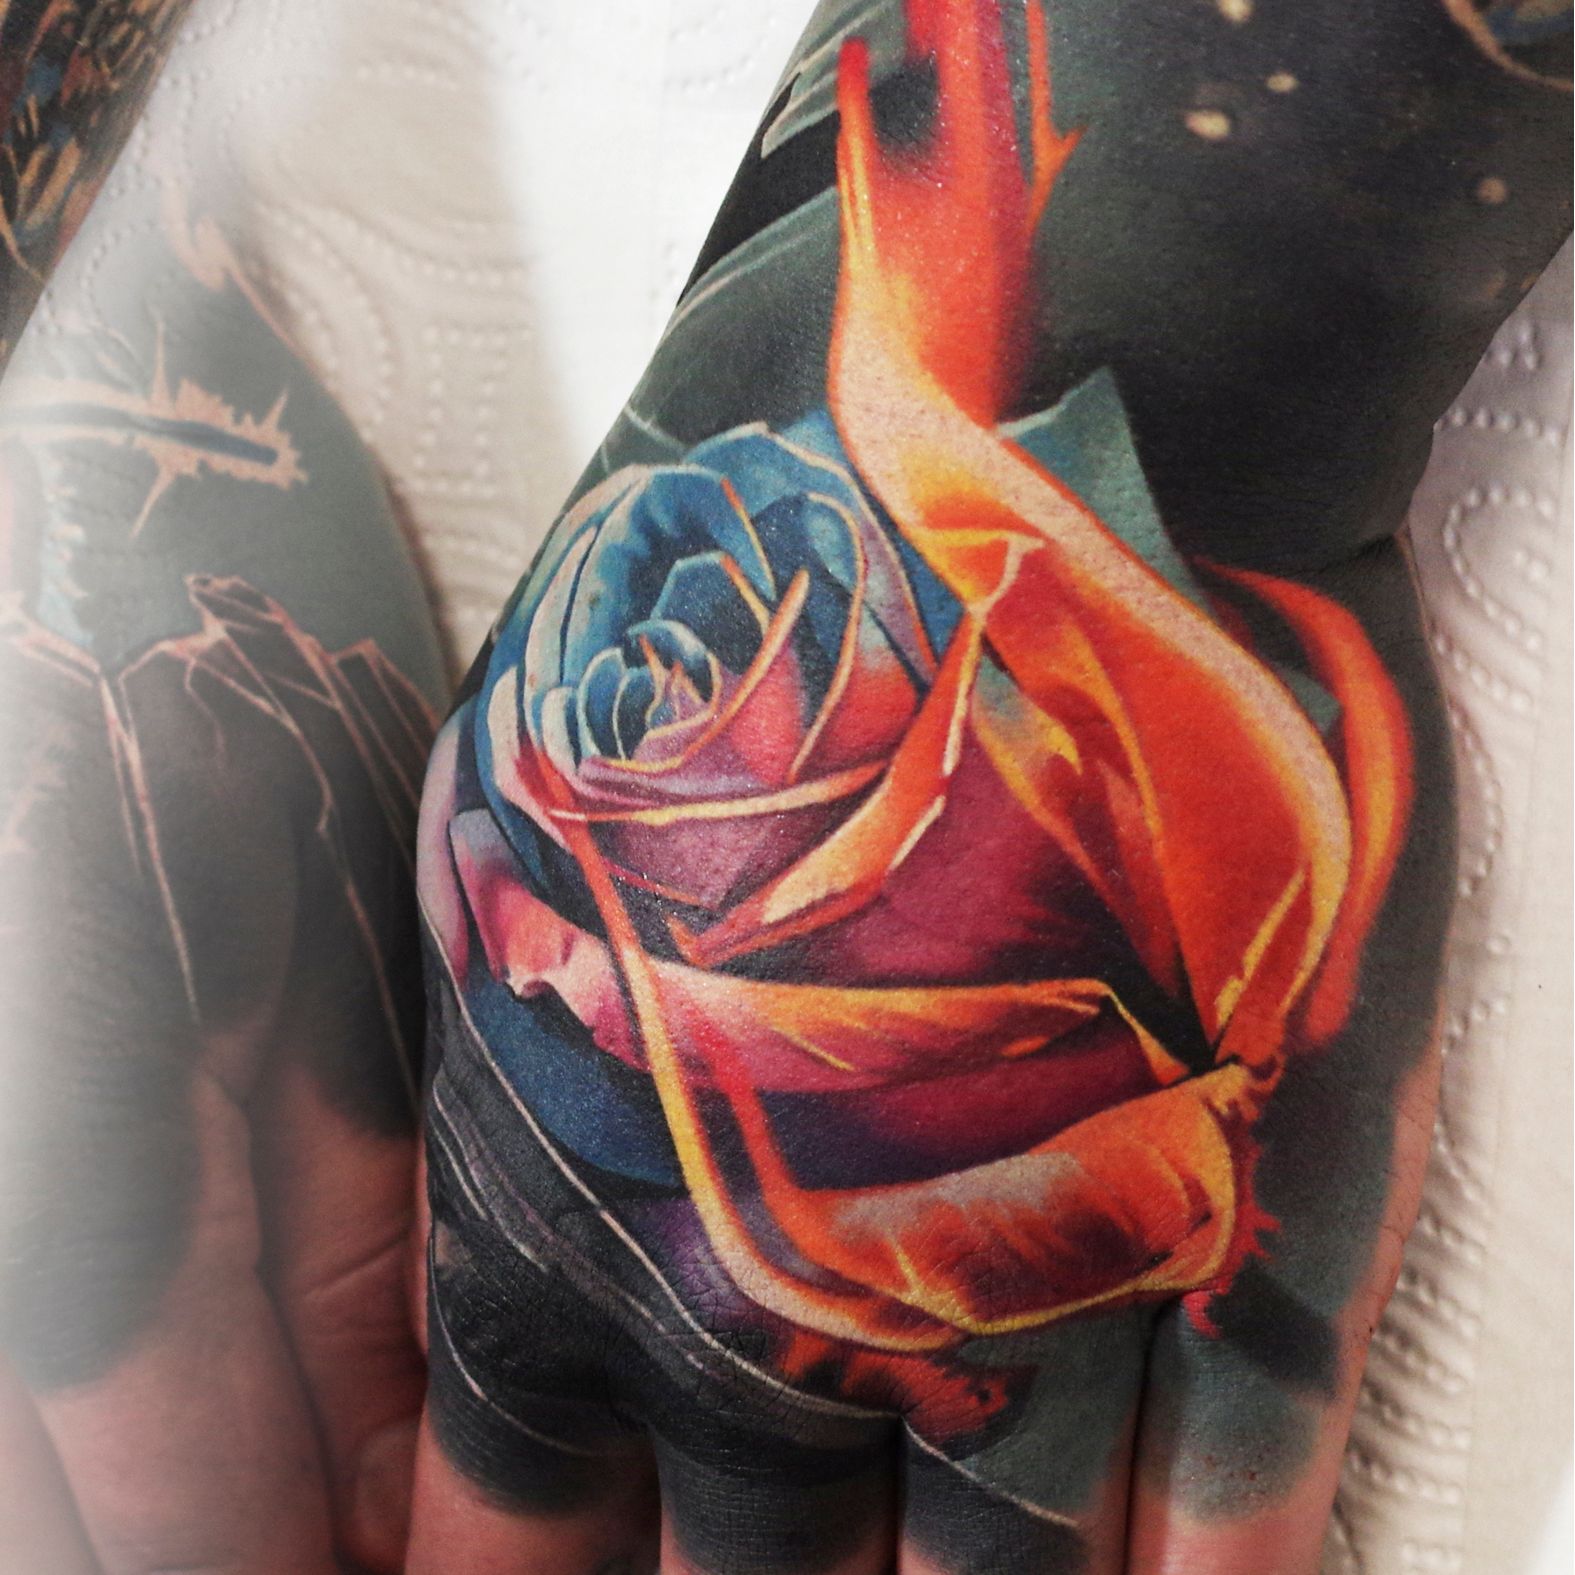 Flaming Roses can be a symbol of  Nick Tattoo studio  Facebook